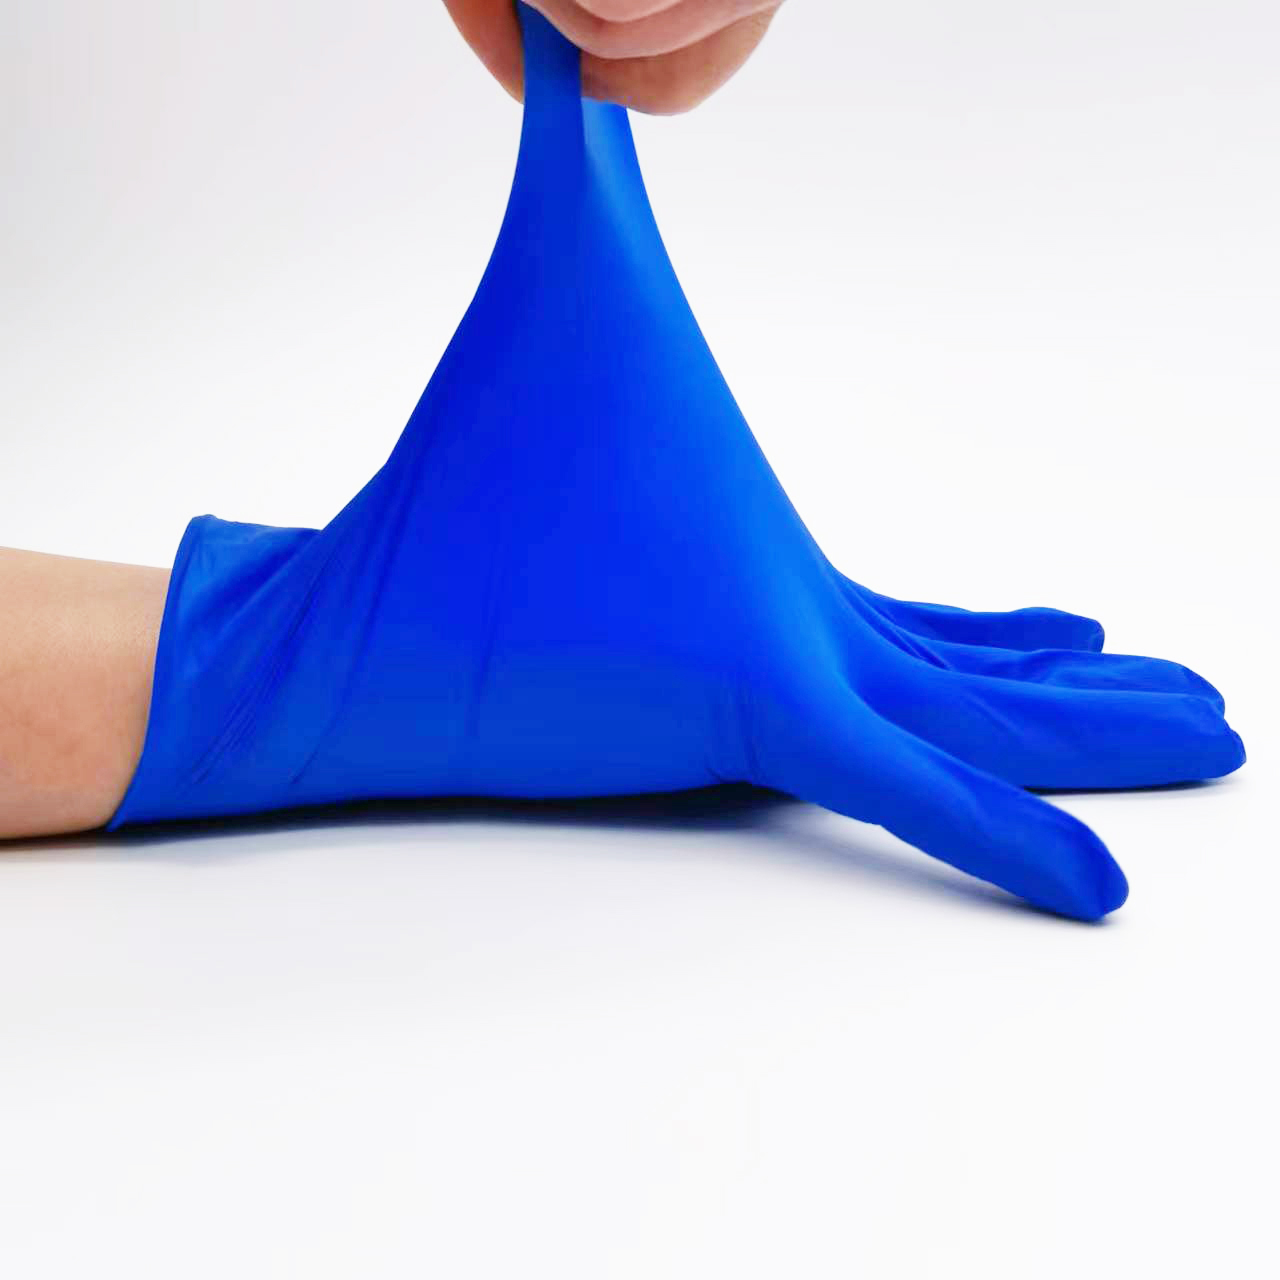 Sample Available CE ISO Medical Grade Industrial Nitrile Gloves S Size Non Sterile